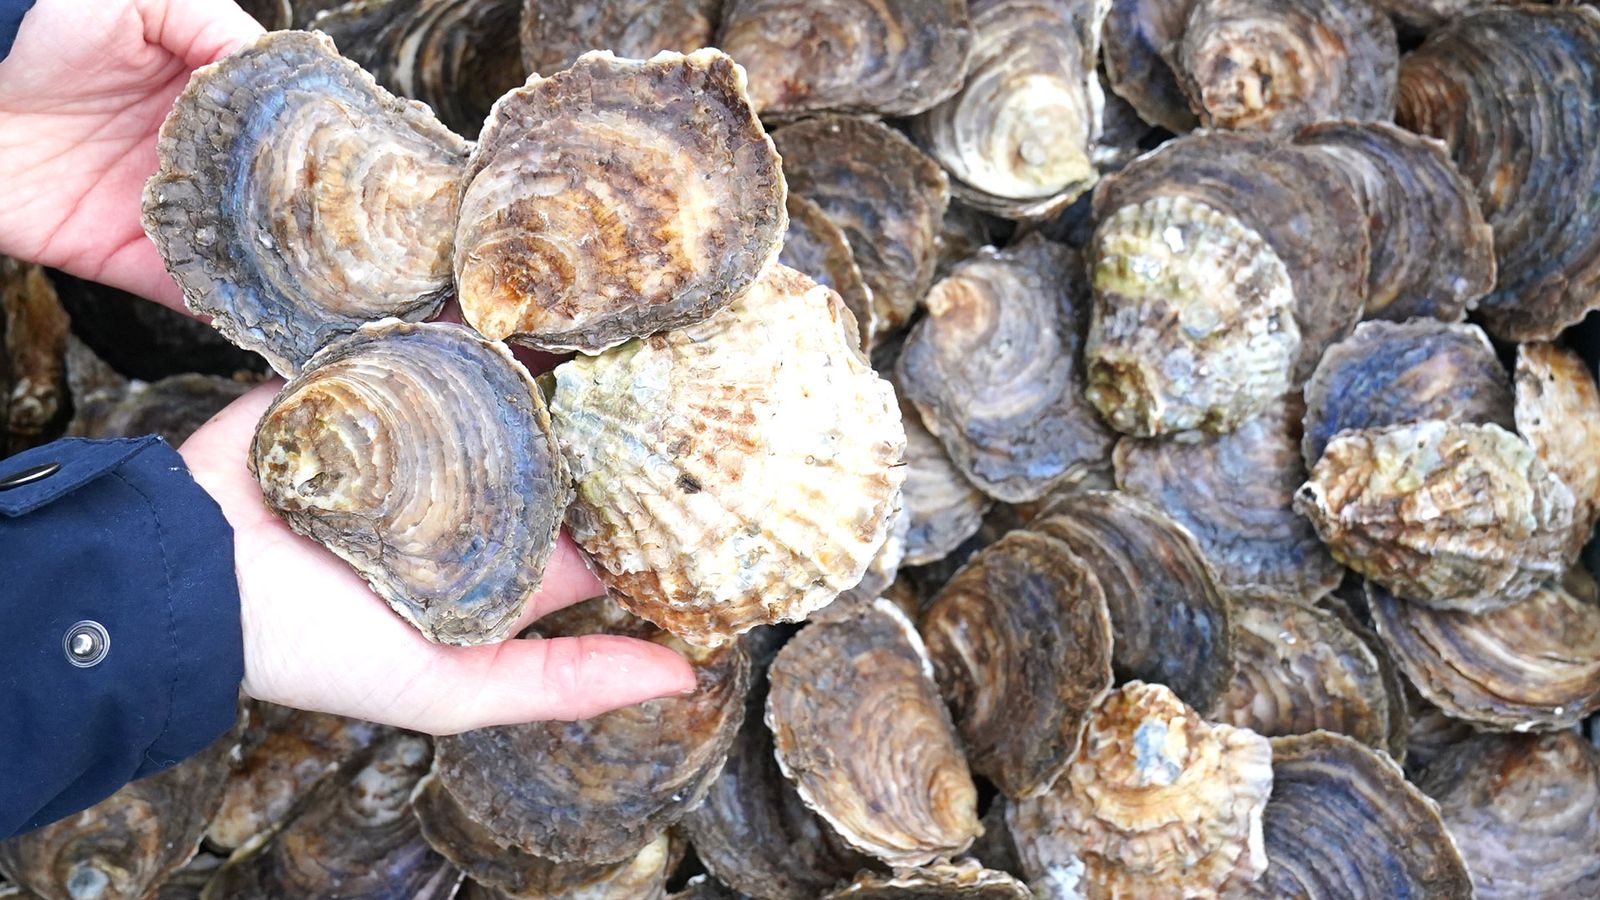 Shellfish industry on a 'knife edge' as sewage dumped in designated waters for 192,000 hours last year